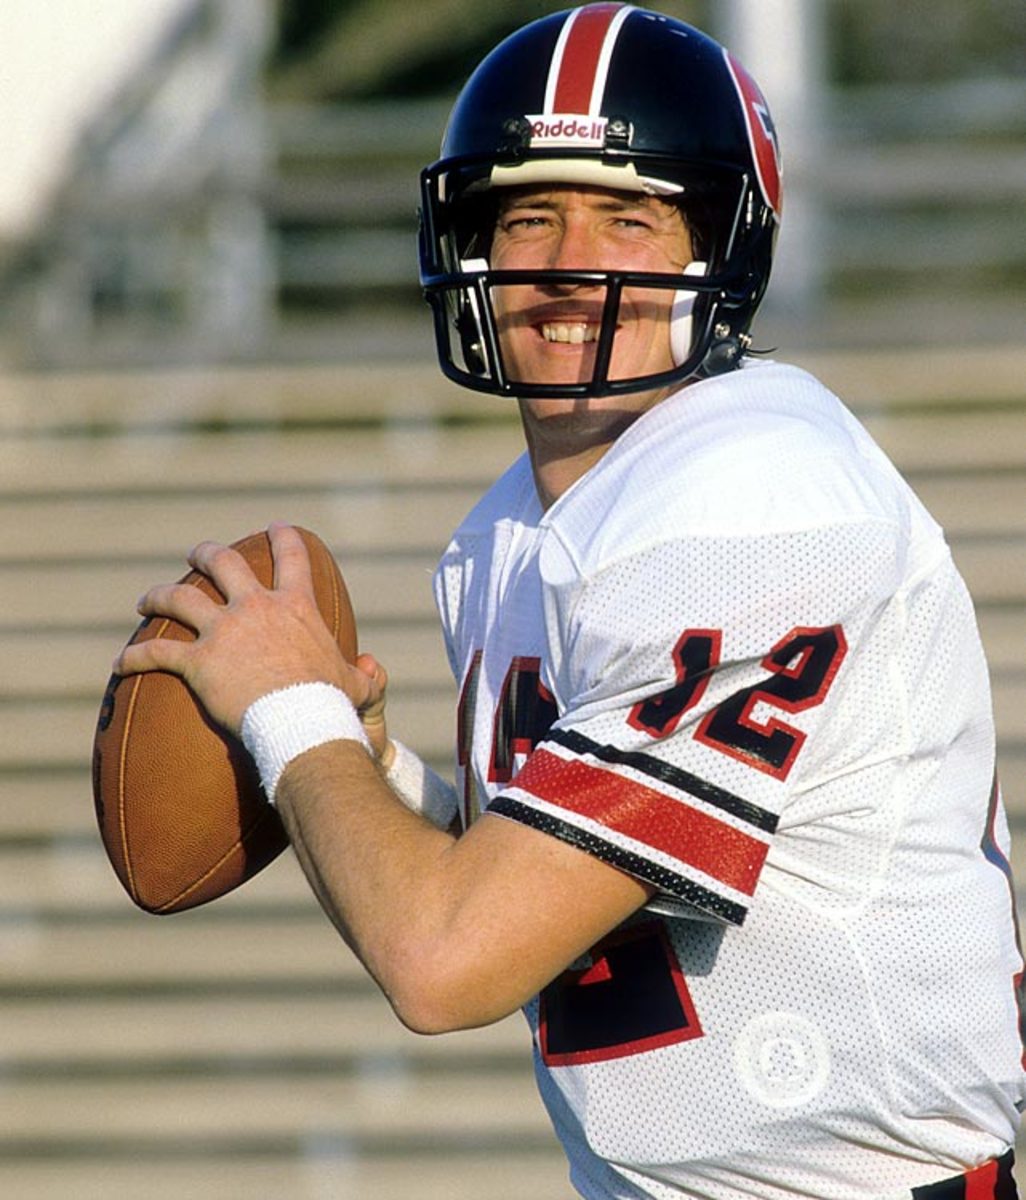 Jim Kelly played with the USFL's Houston Gamblers before move to the Bills in the NFL.